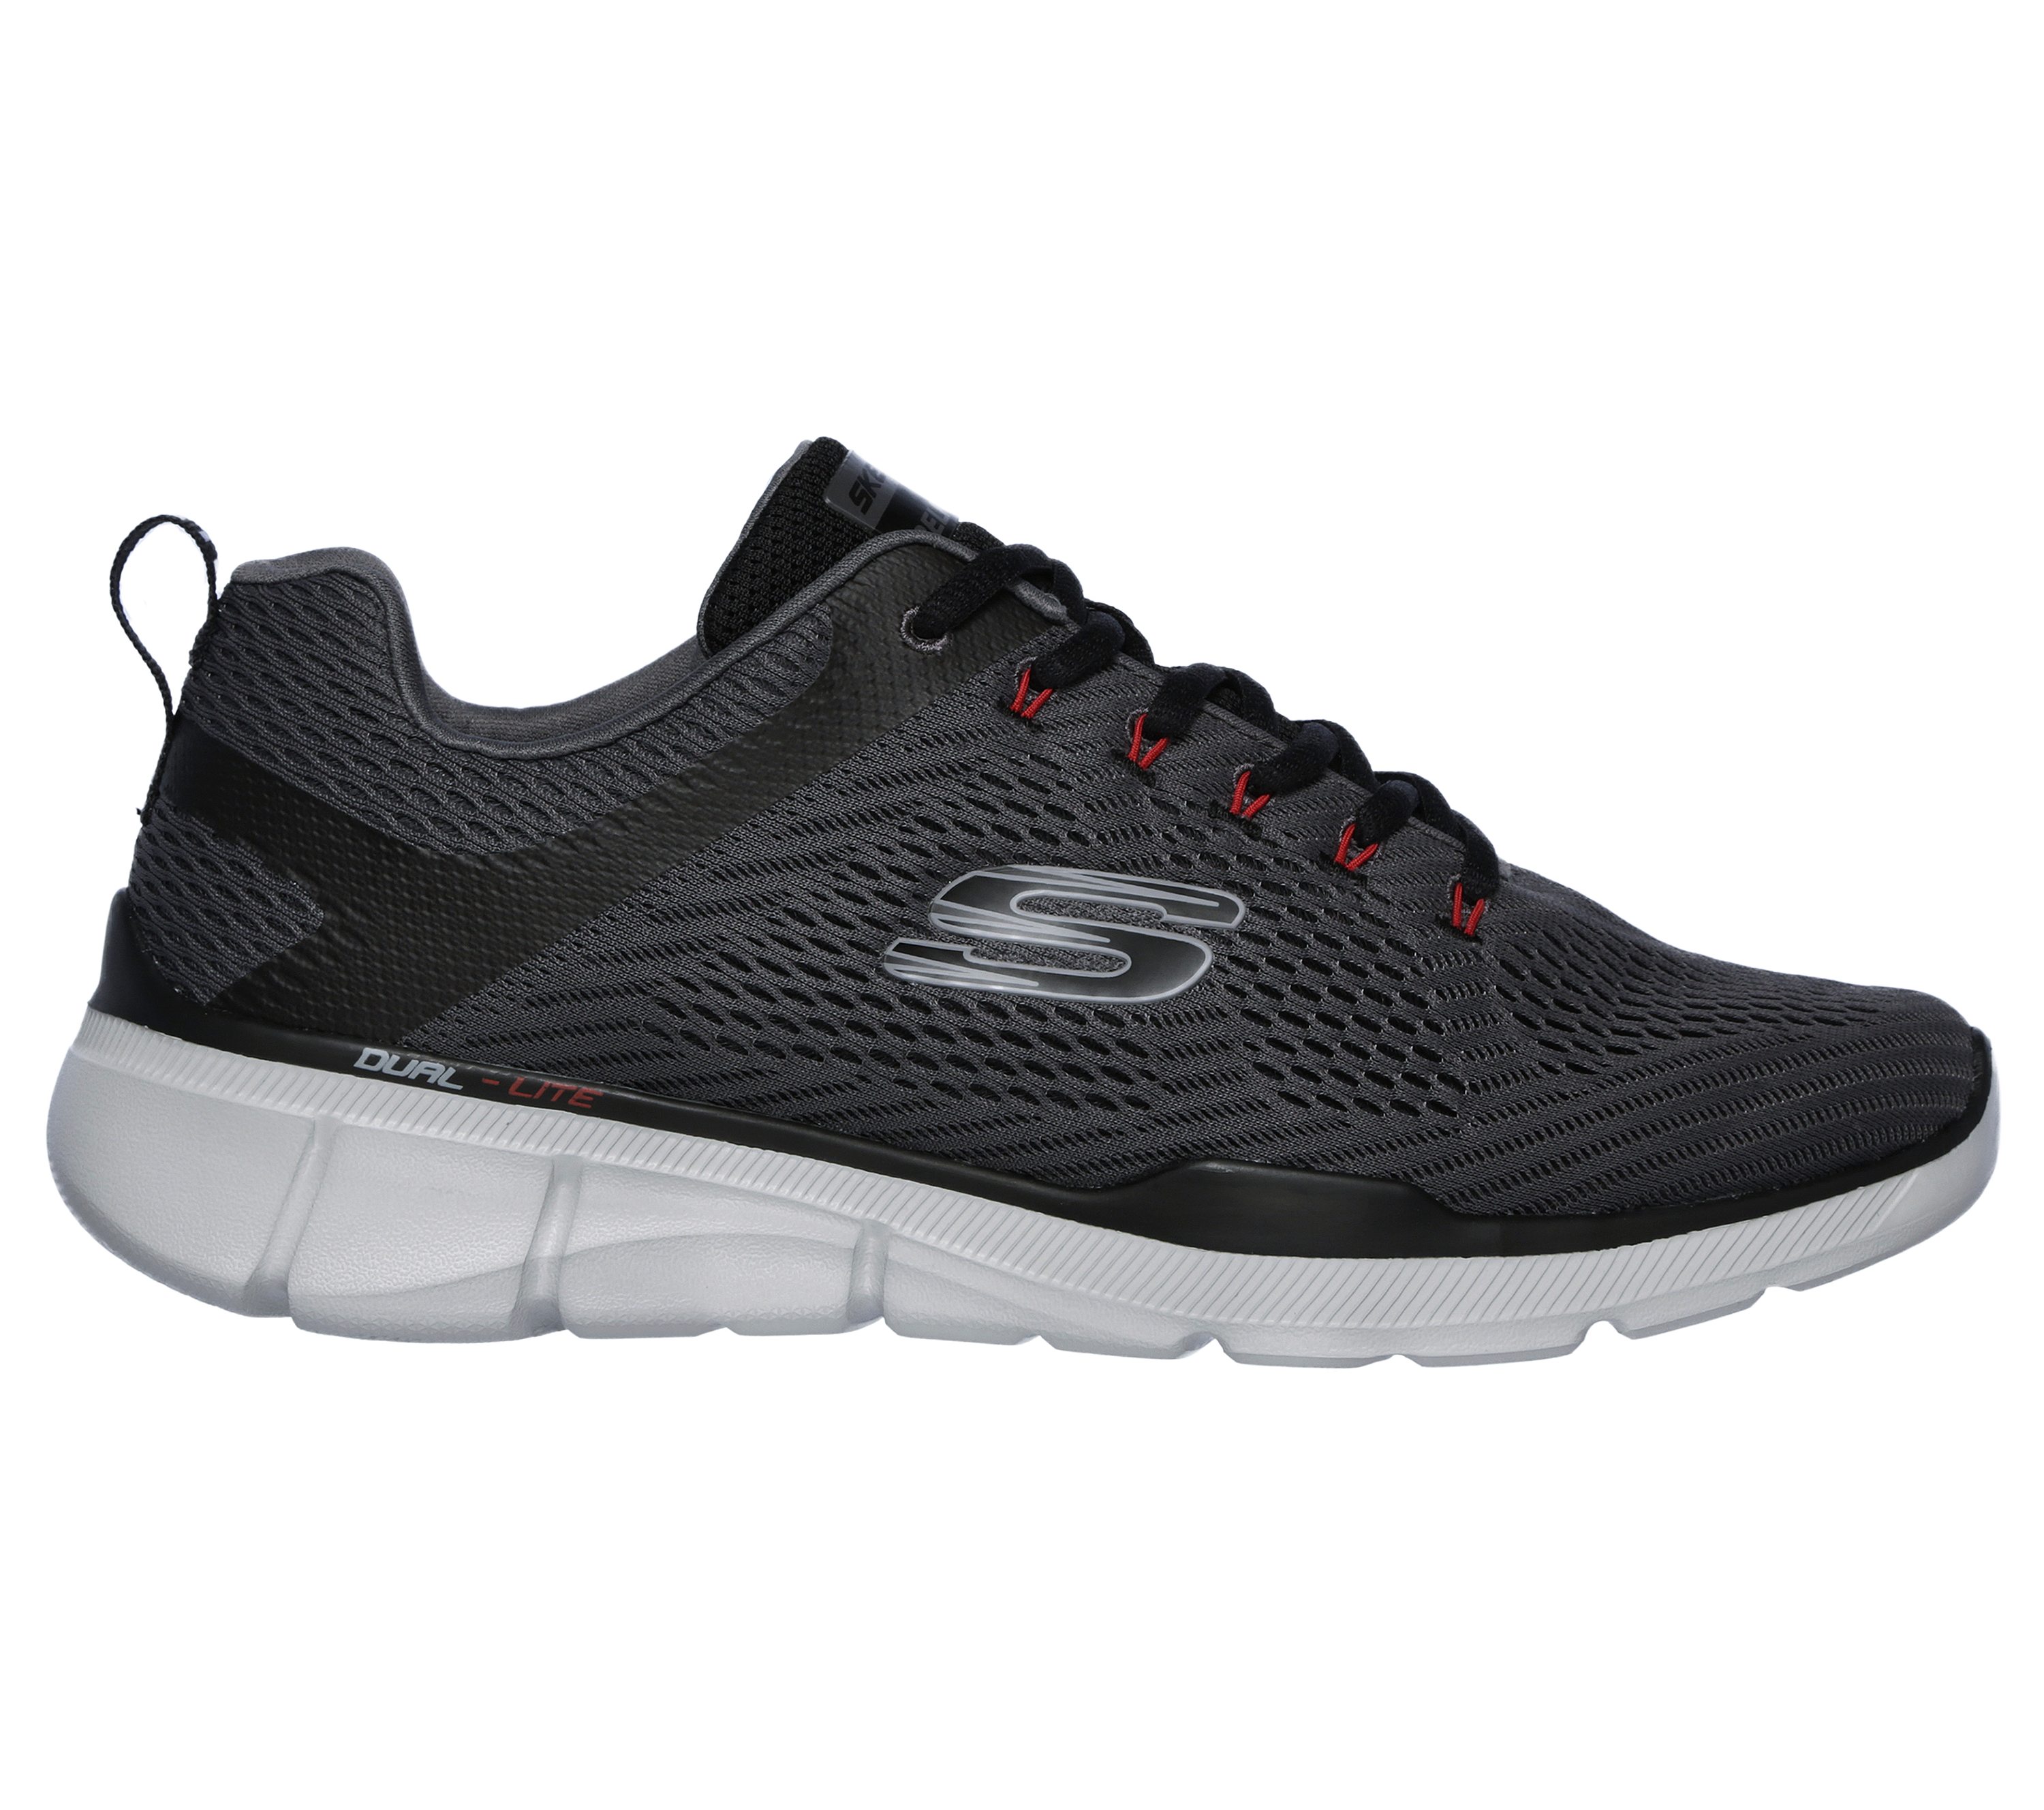 skechers equalizer this way